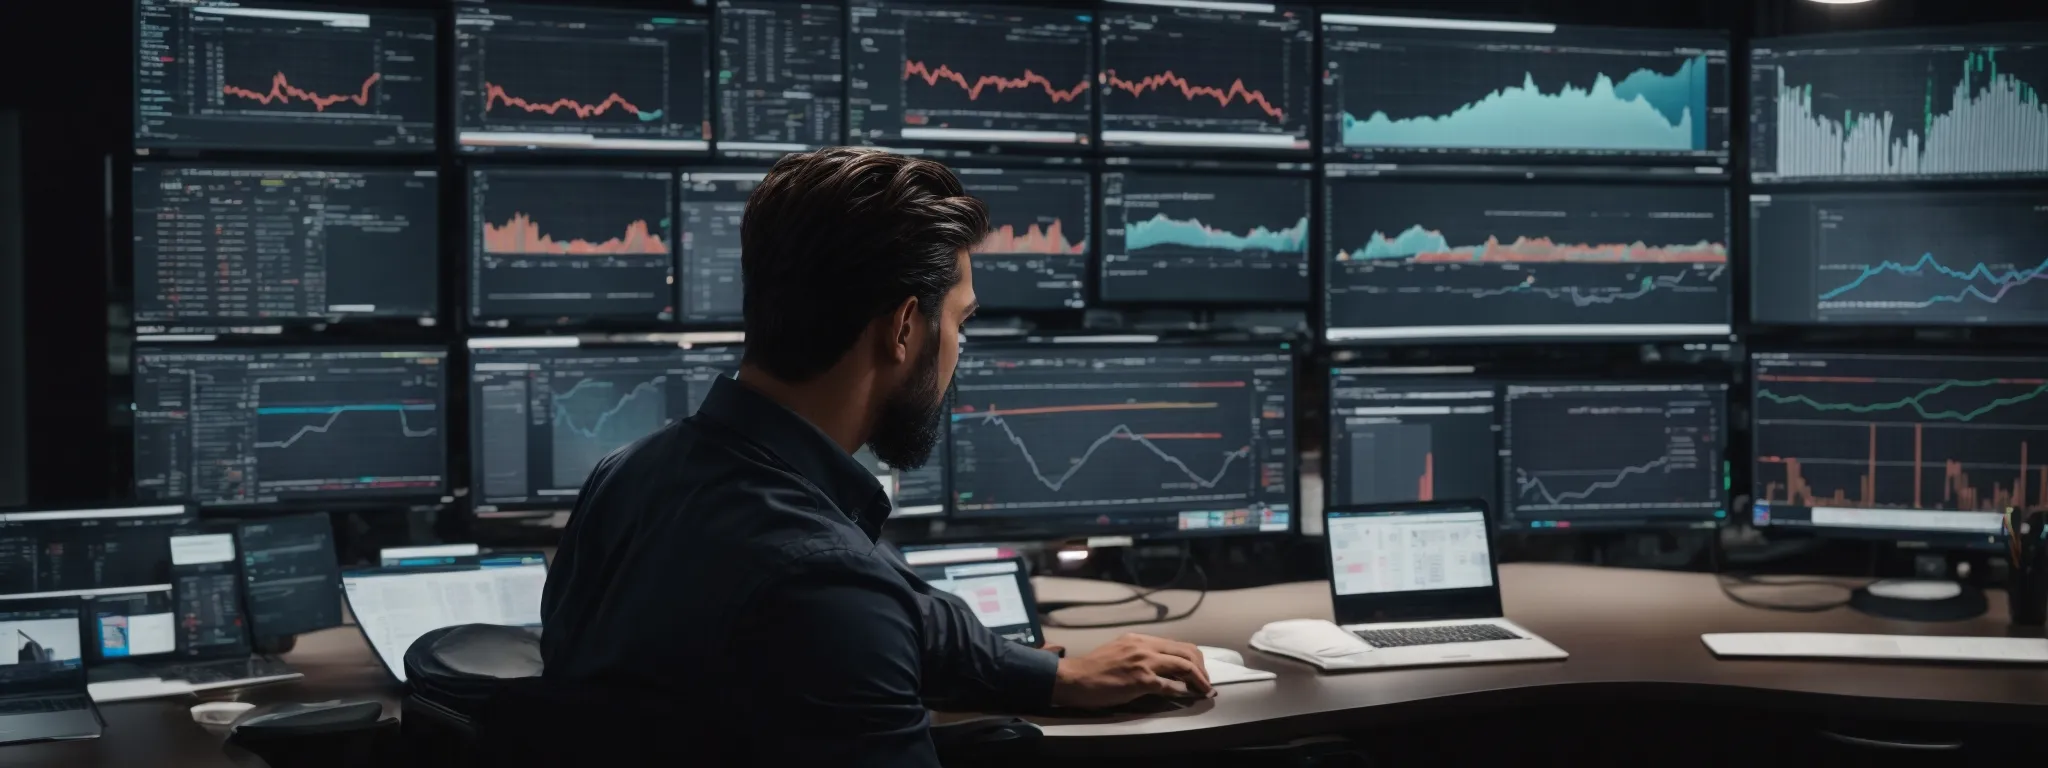 a focused individual sits at a modern desk, surrounded by screens displaying graphs and analytics, engaged in strategizing content for a business audience.